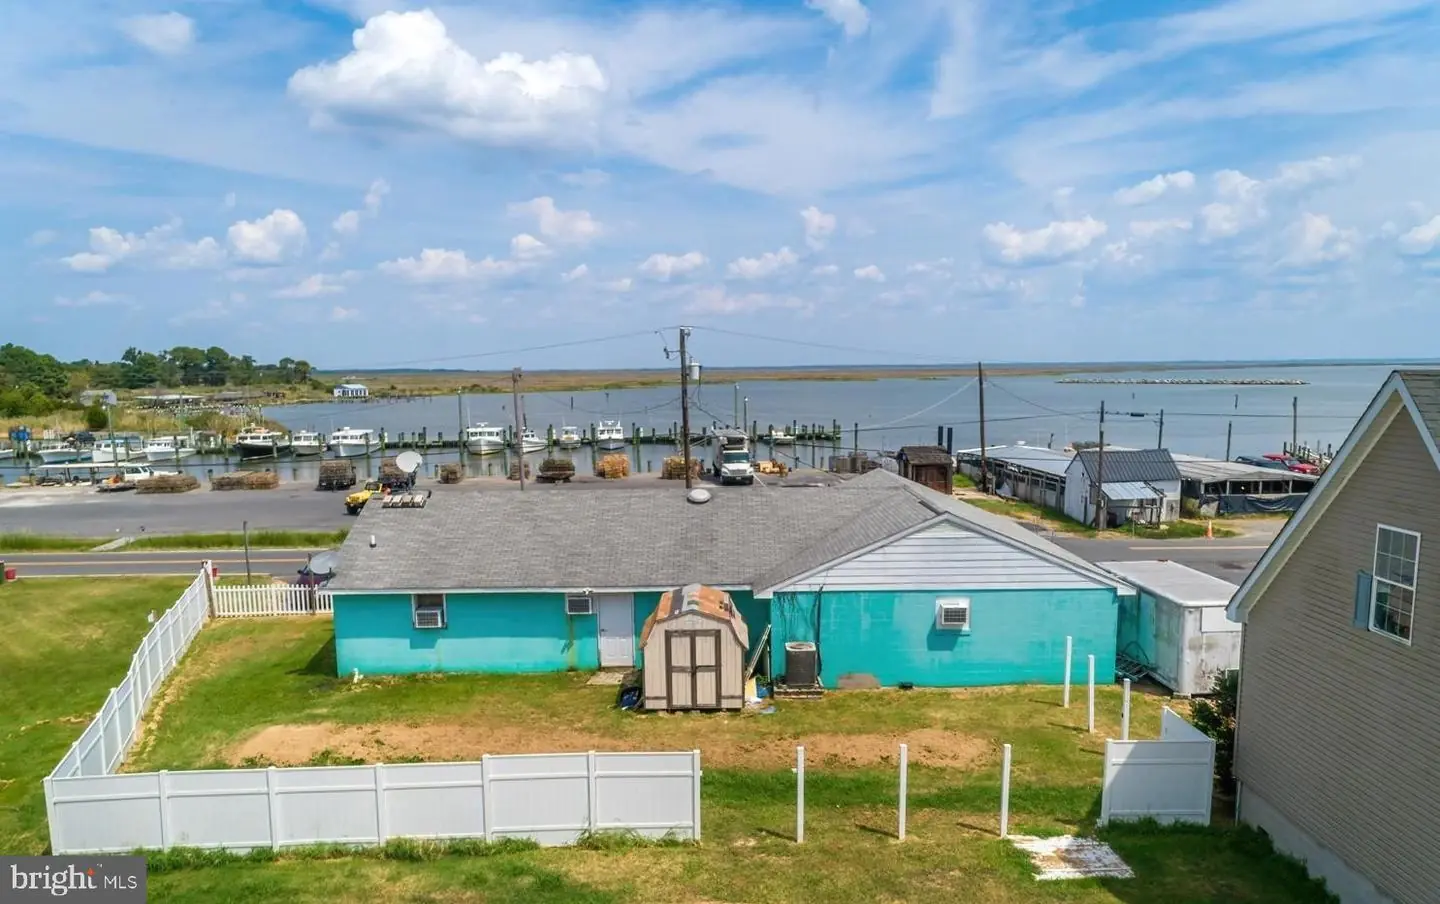 MDSO2003732-802638974062-2023-09-28-10-56-03 8952 Deal Island Rd | Deal Island, MD Real Estate For Sale | MLS# Mdso2003732  - Ocean Atlantic